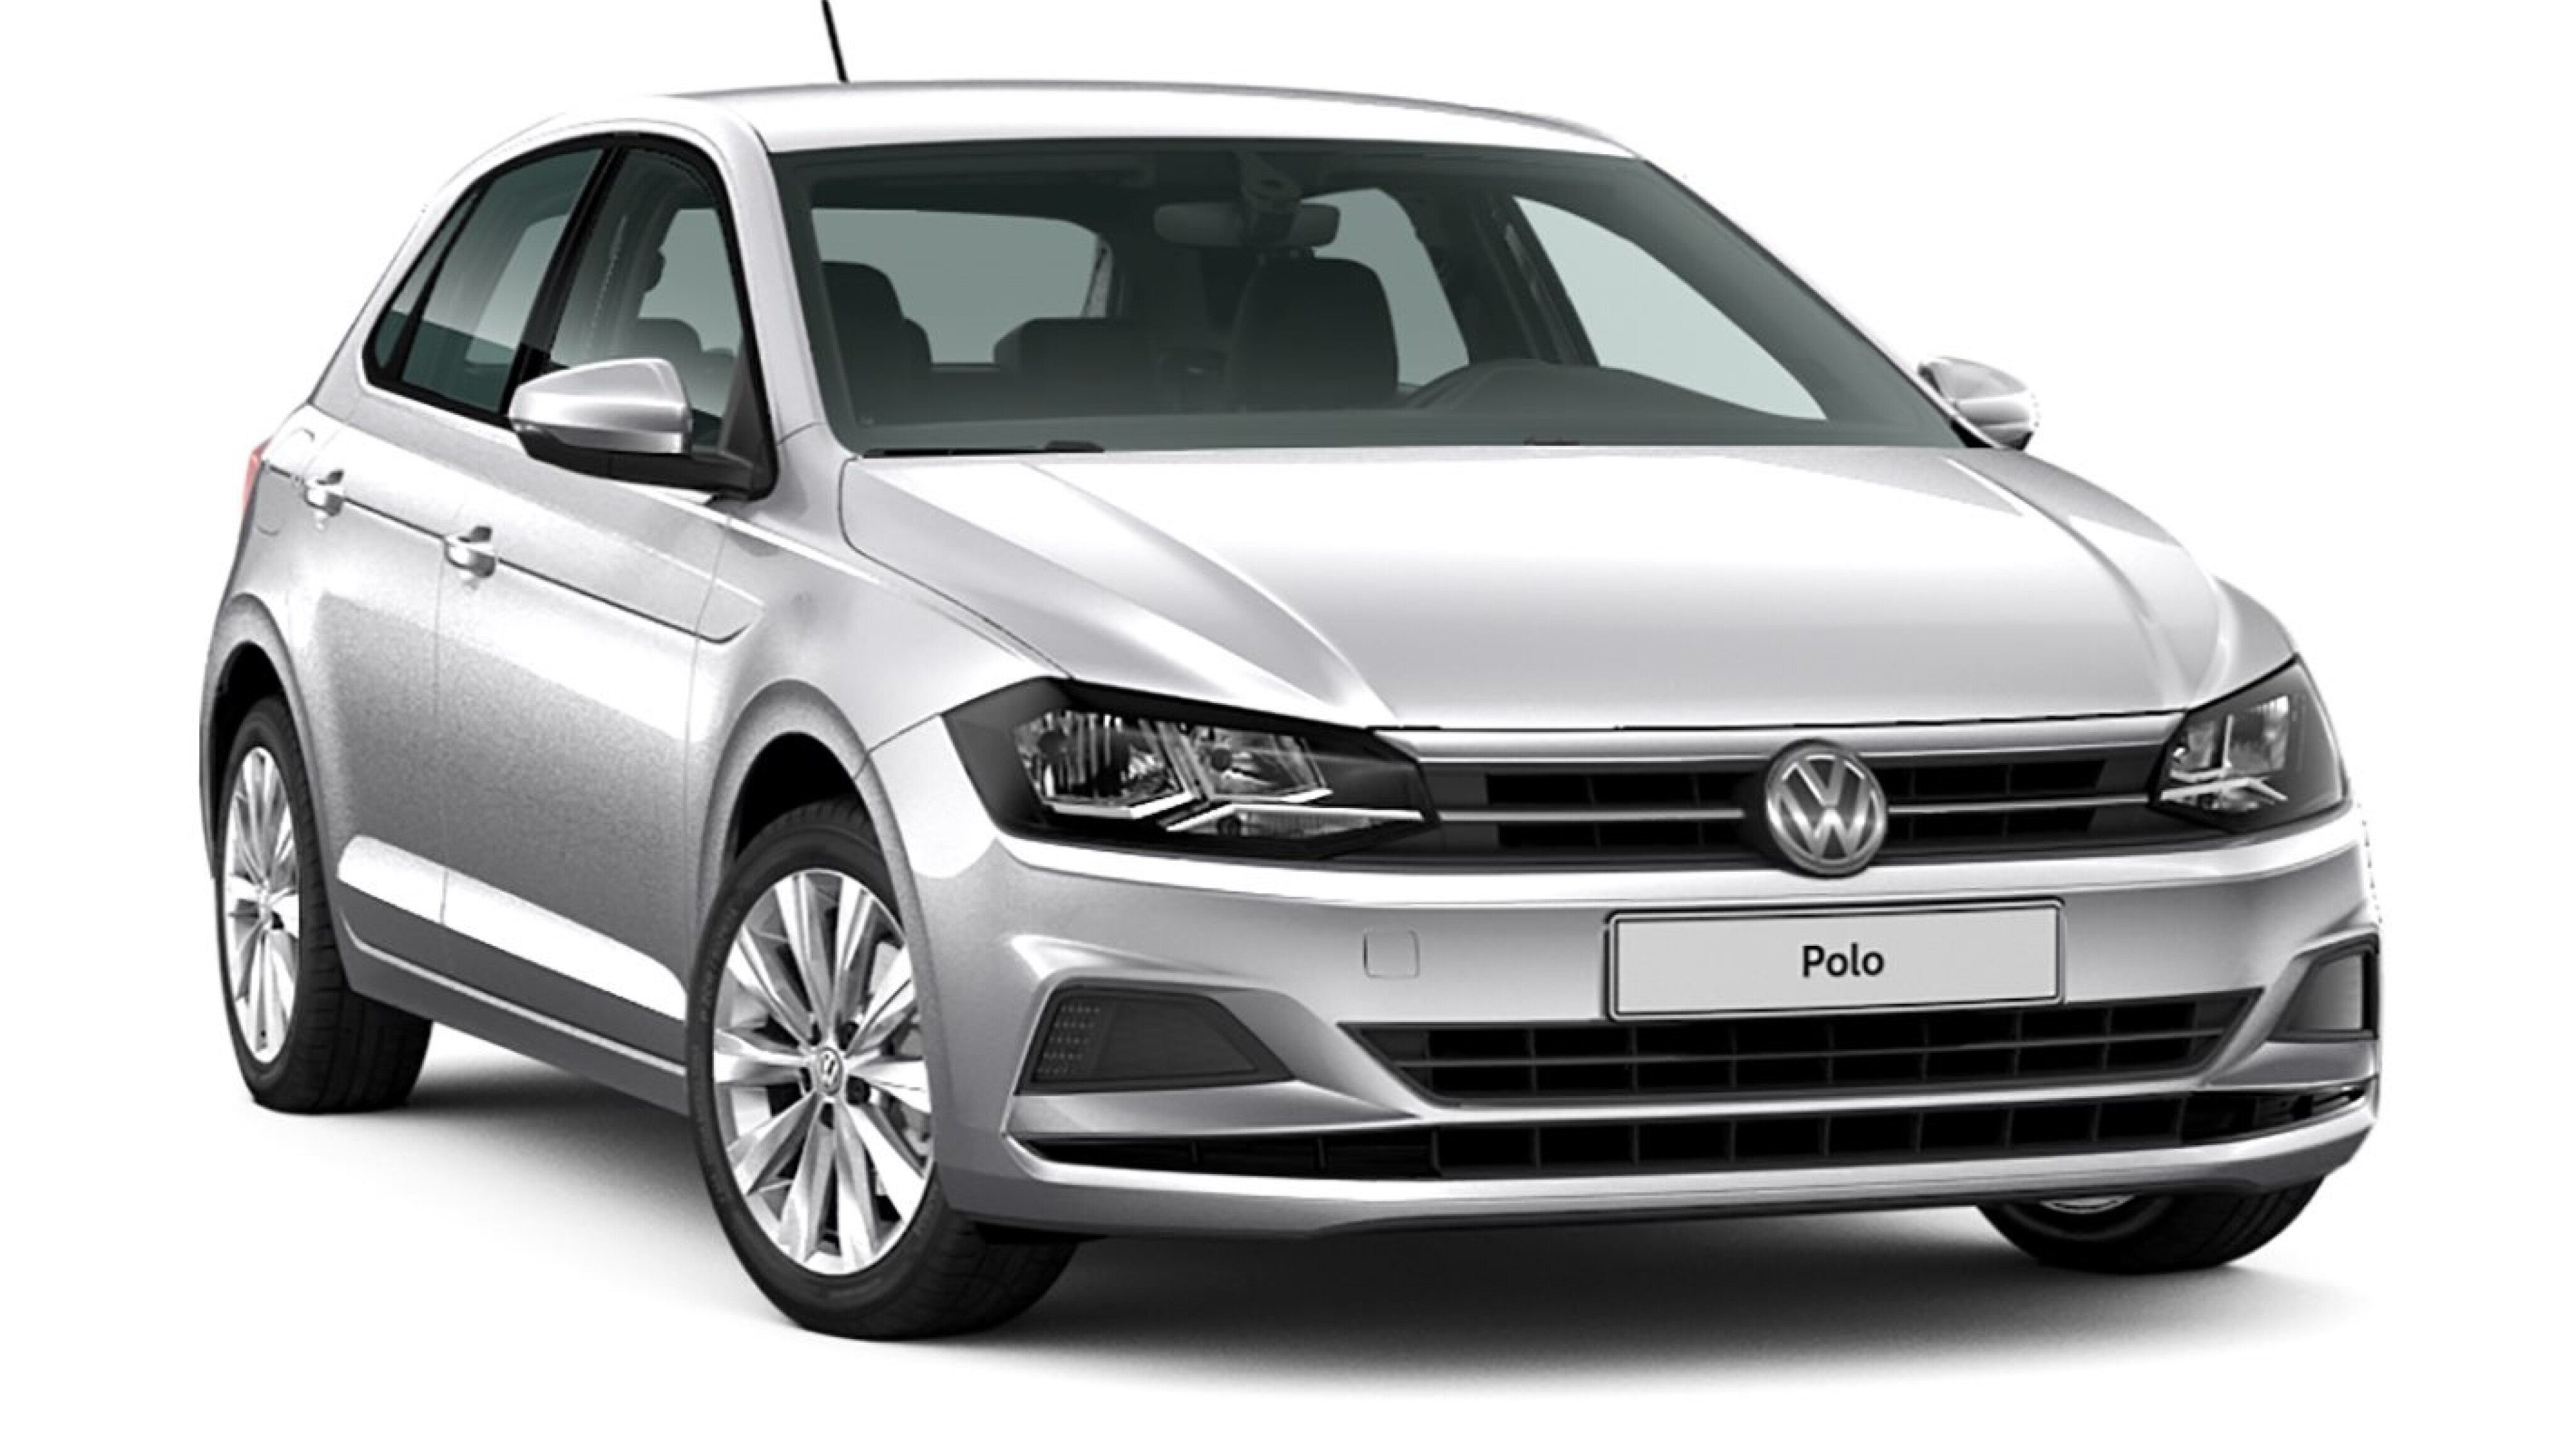 2019 Volkswagen Polo Style grade added as new sub-GTI flagship